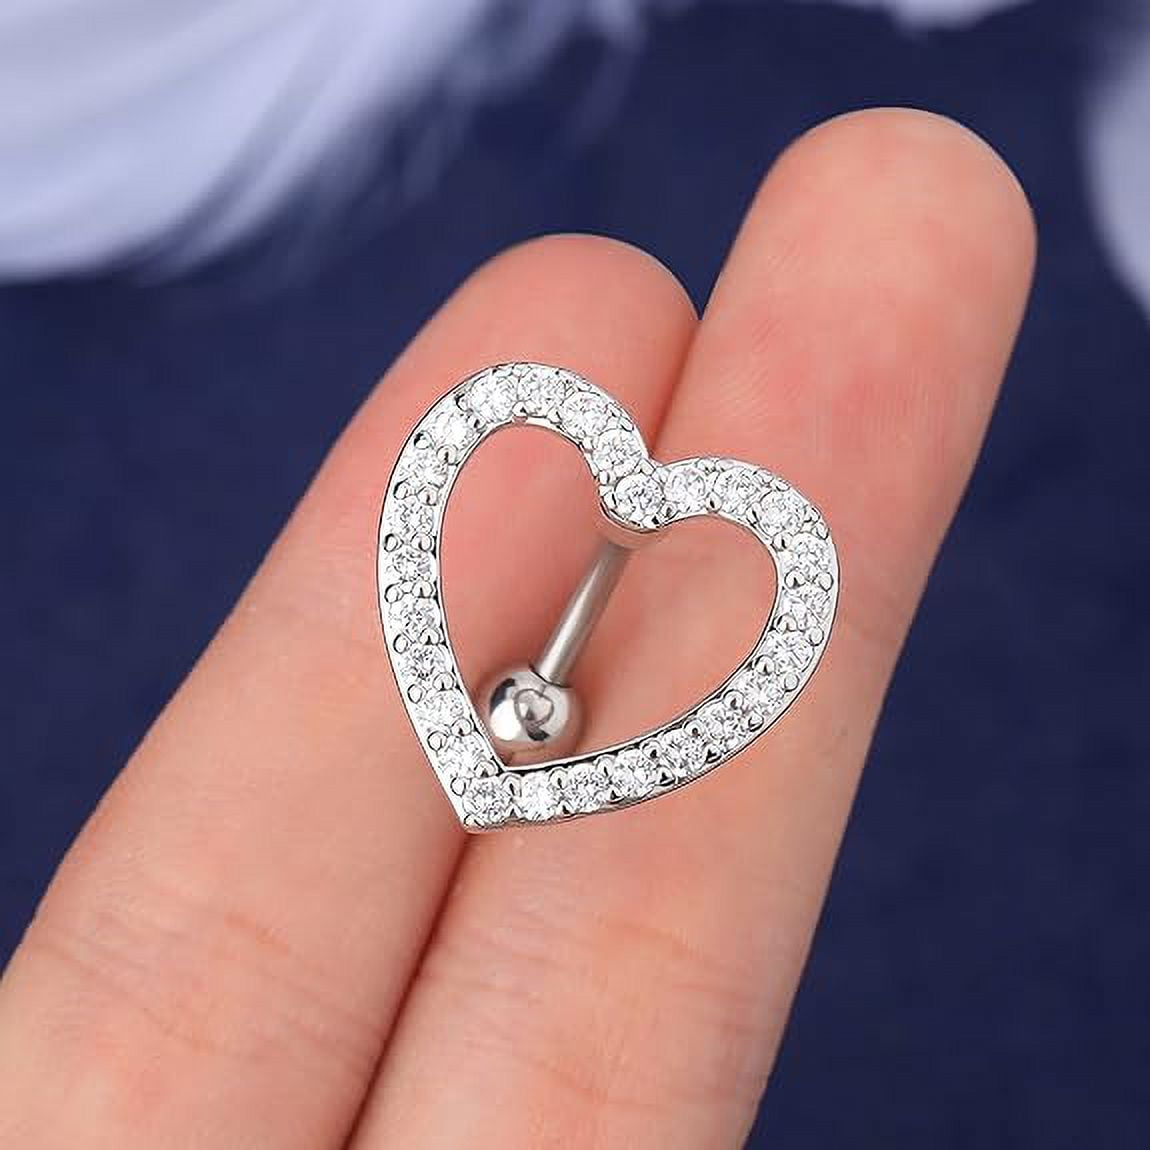 Belly Button Piercing Ring | Navel Piercing Silver 925 | Curved Belly  Button Ring - 1pc - Aliexpress